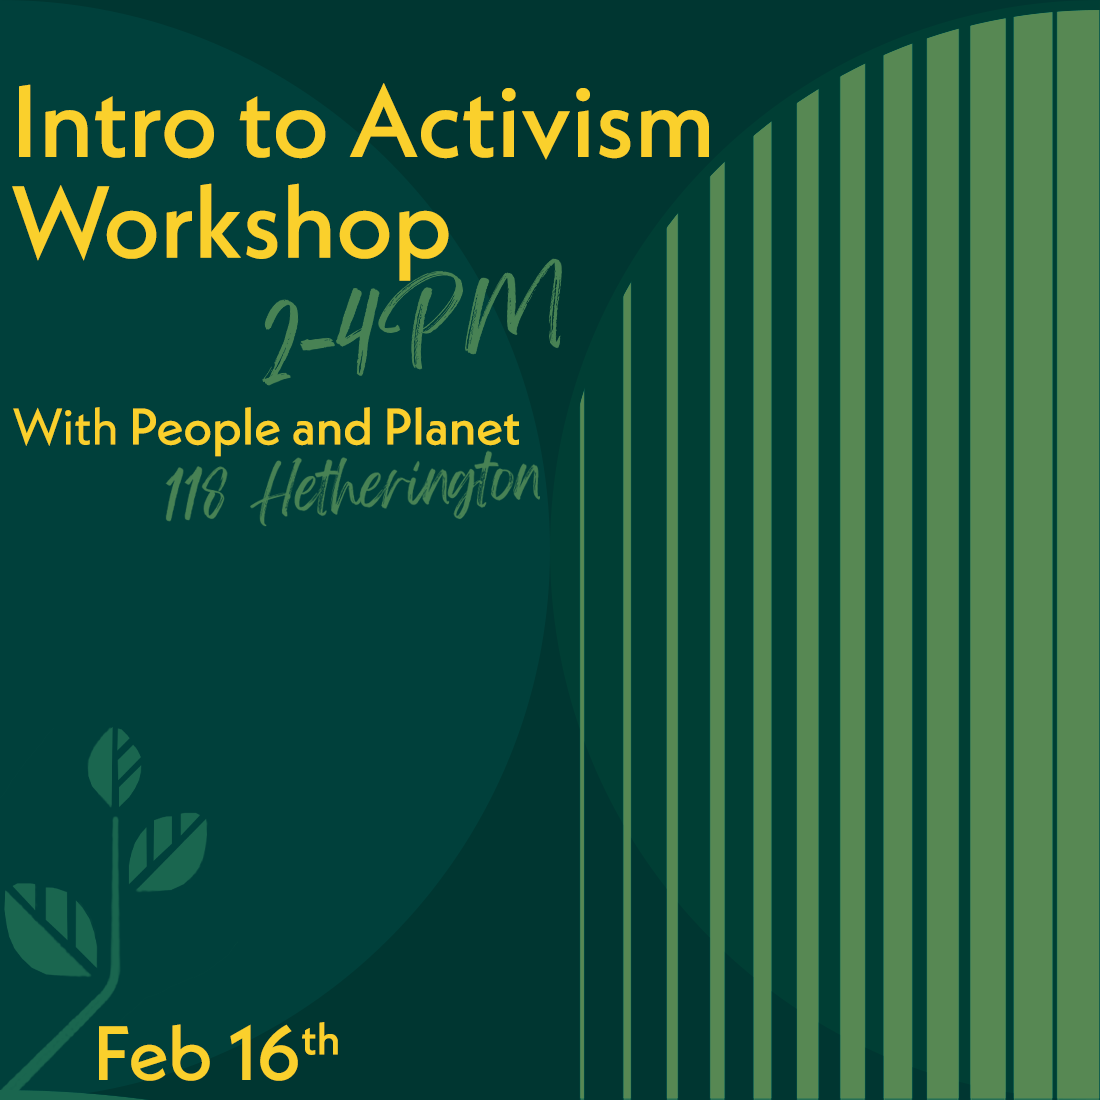 ✨ We're excited to be hosting a workshop on an 'Introduction to Activism' this Friday at Glasgow University! ✊ Join us to find out how to build powerful campaigns on campus 📍118 Hetherington 📅 2-4pm, Friday 16th February 🎟️ Register now to join 👇 eventbrite.co.uk/e/intro-to-act…